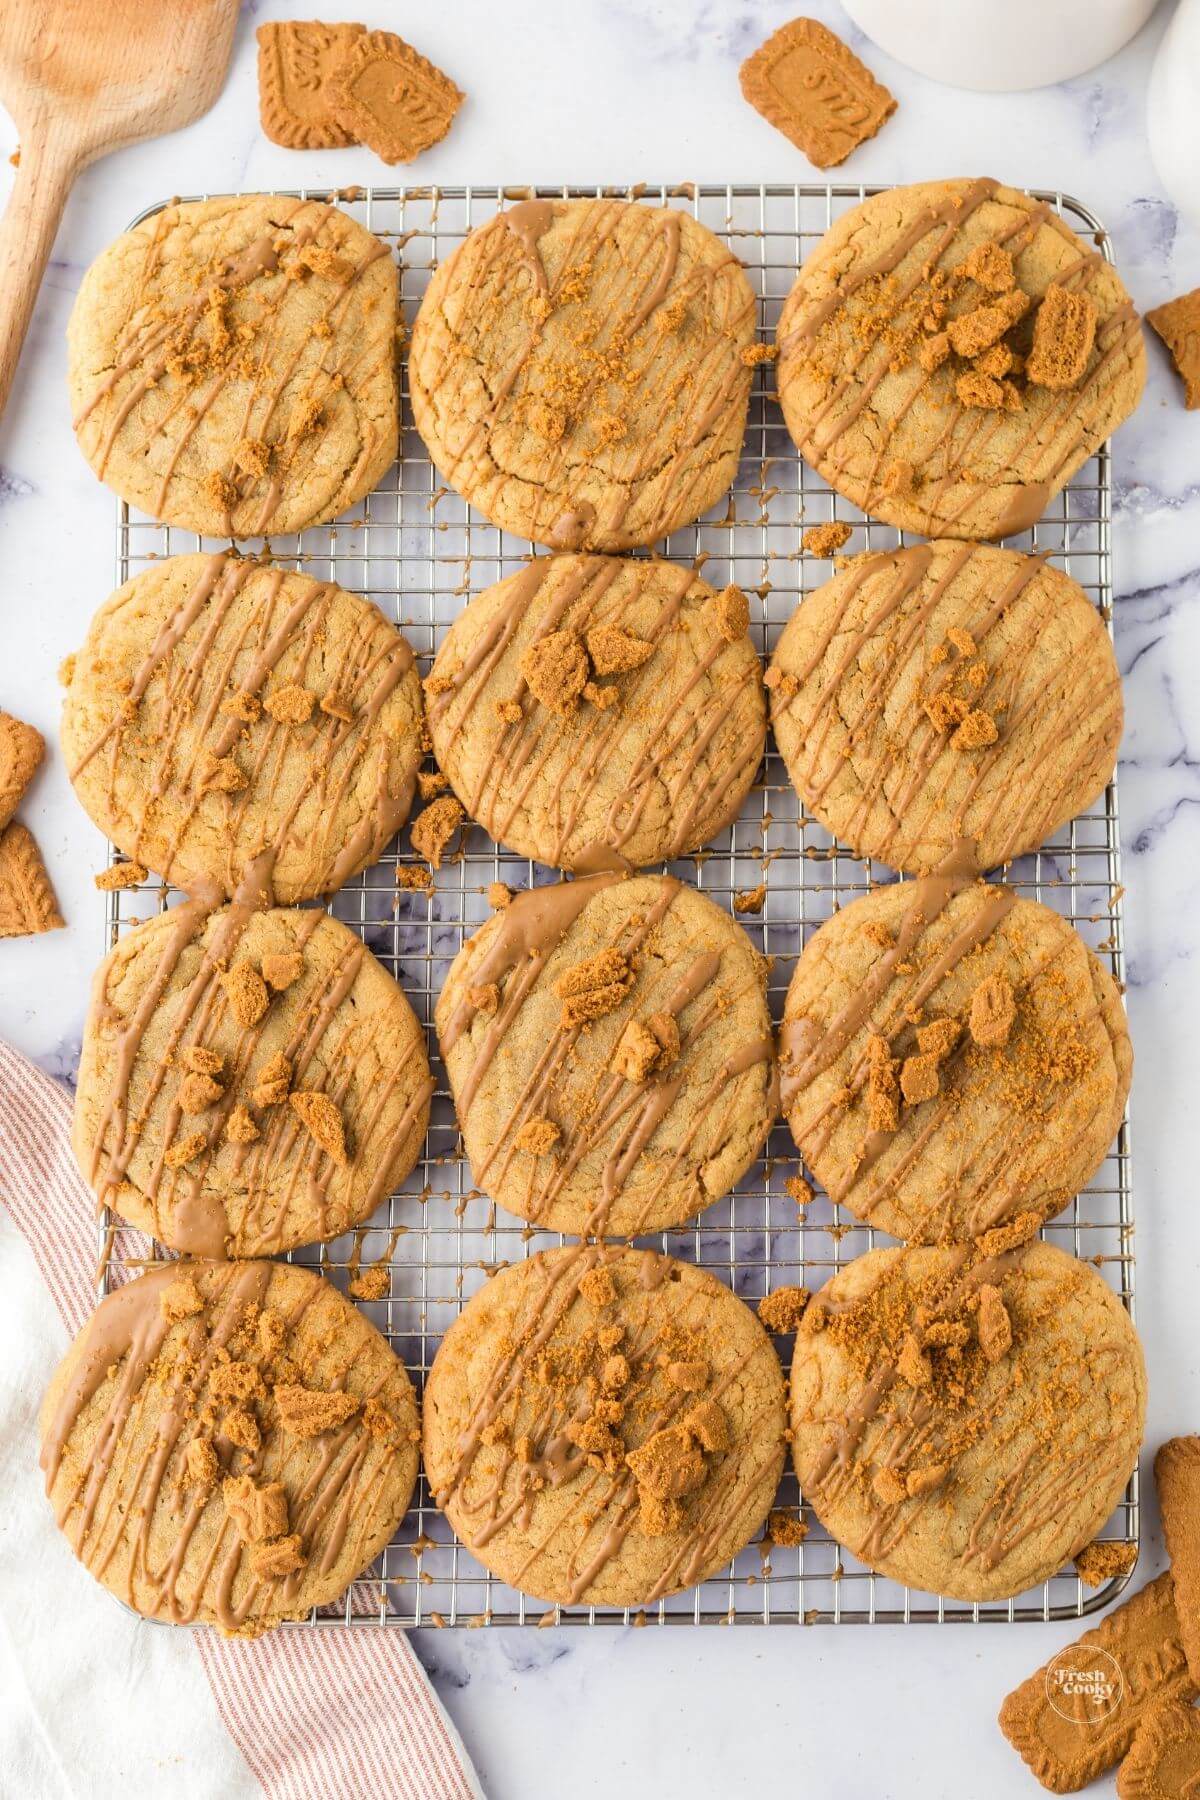 Decorate cookie butter cookies if desired.